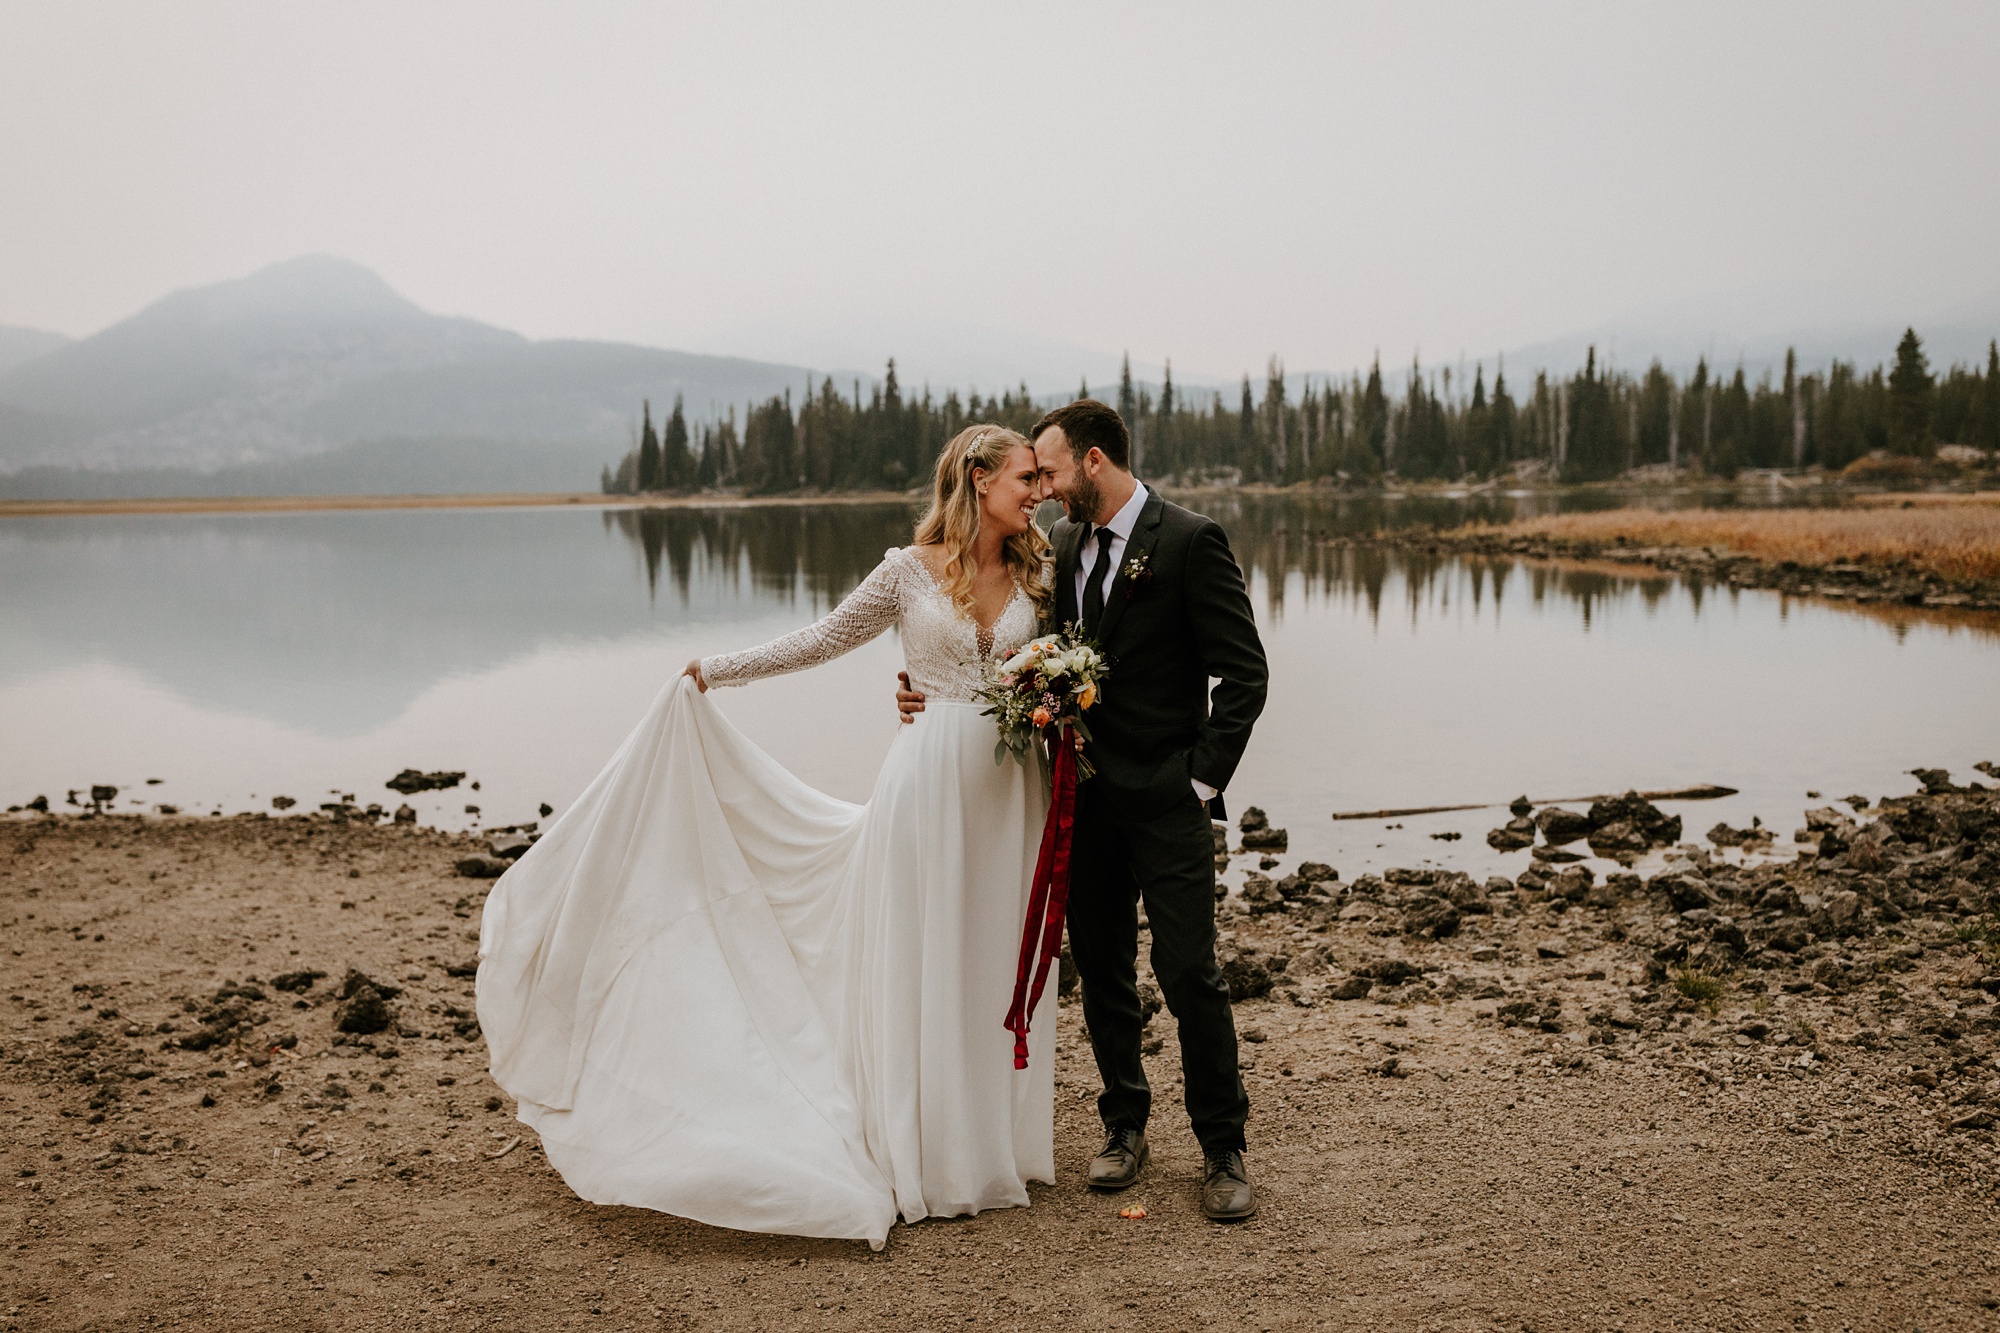 adventure wedding elopement cascade lakes highway sparks lake dogs bend central oregon summer smoke wildfire